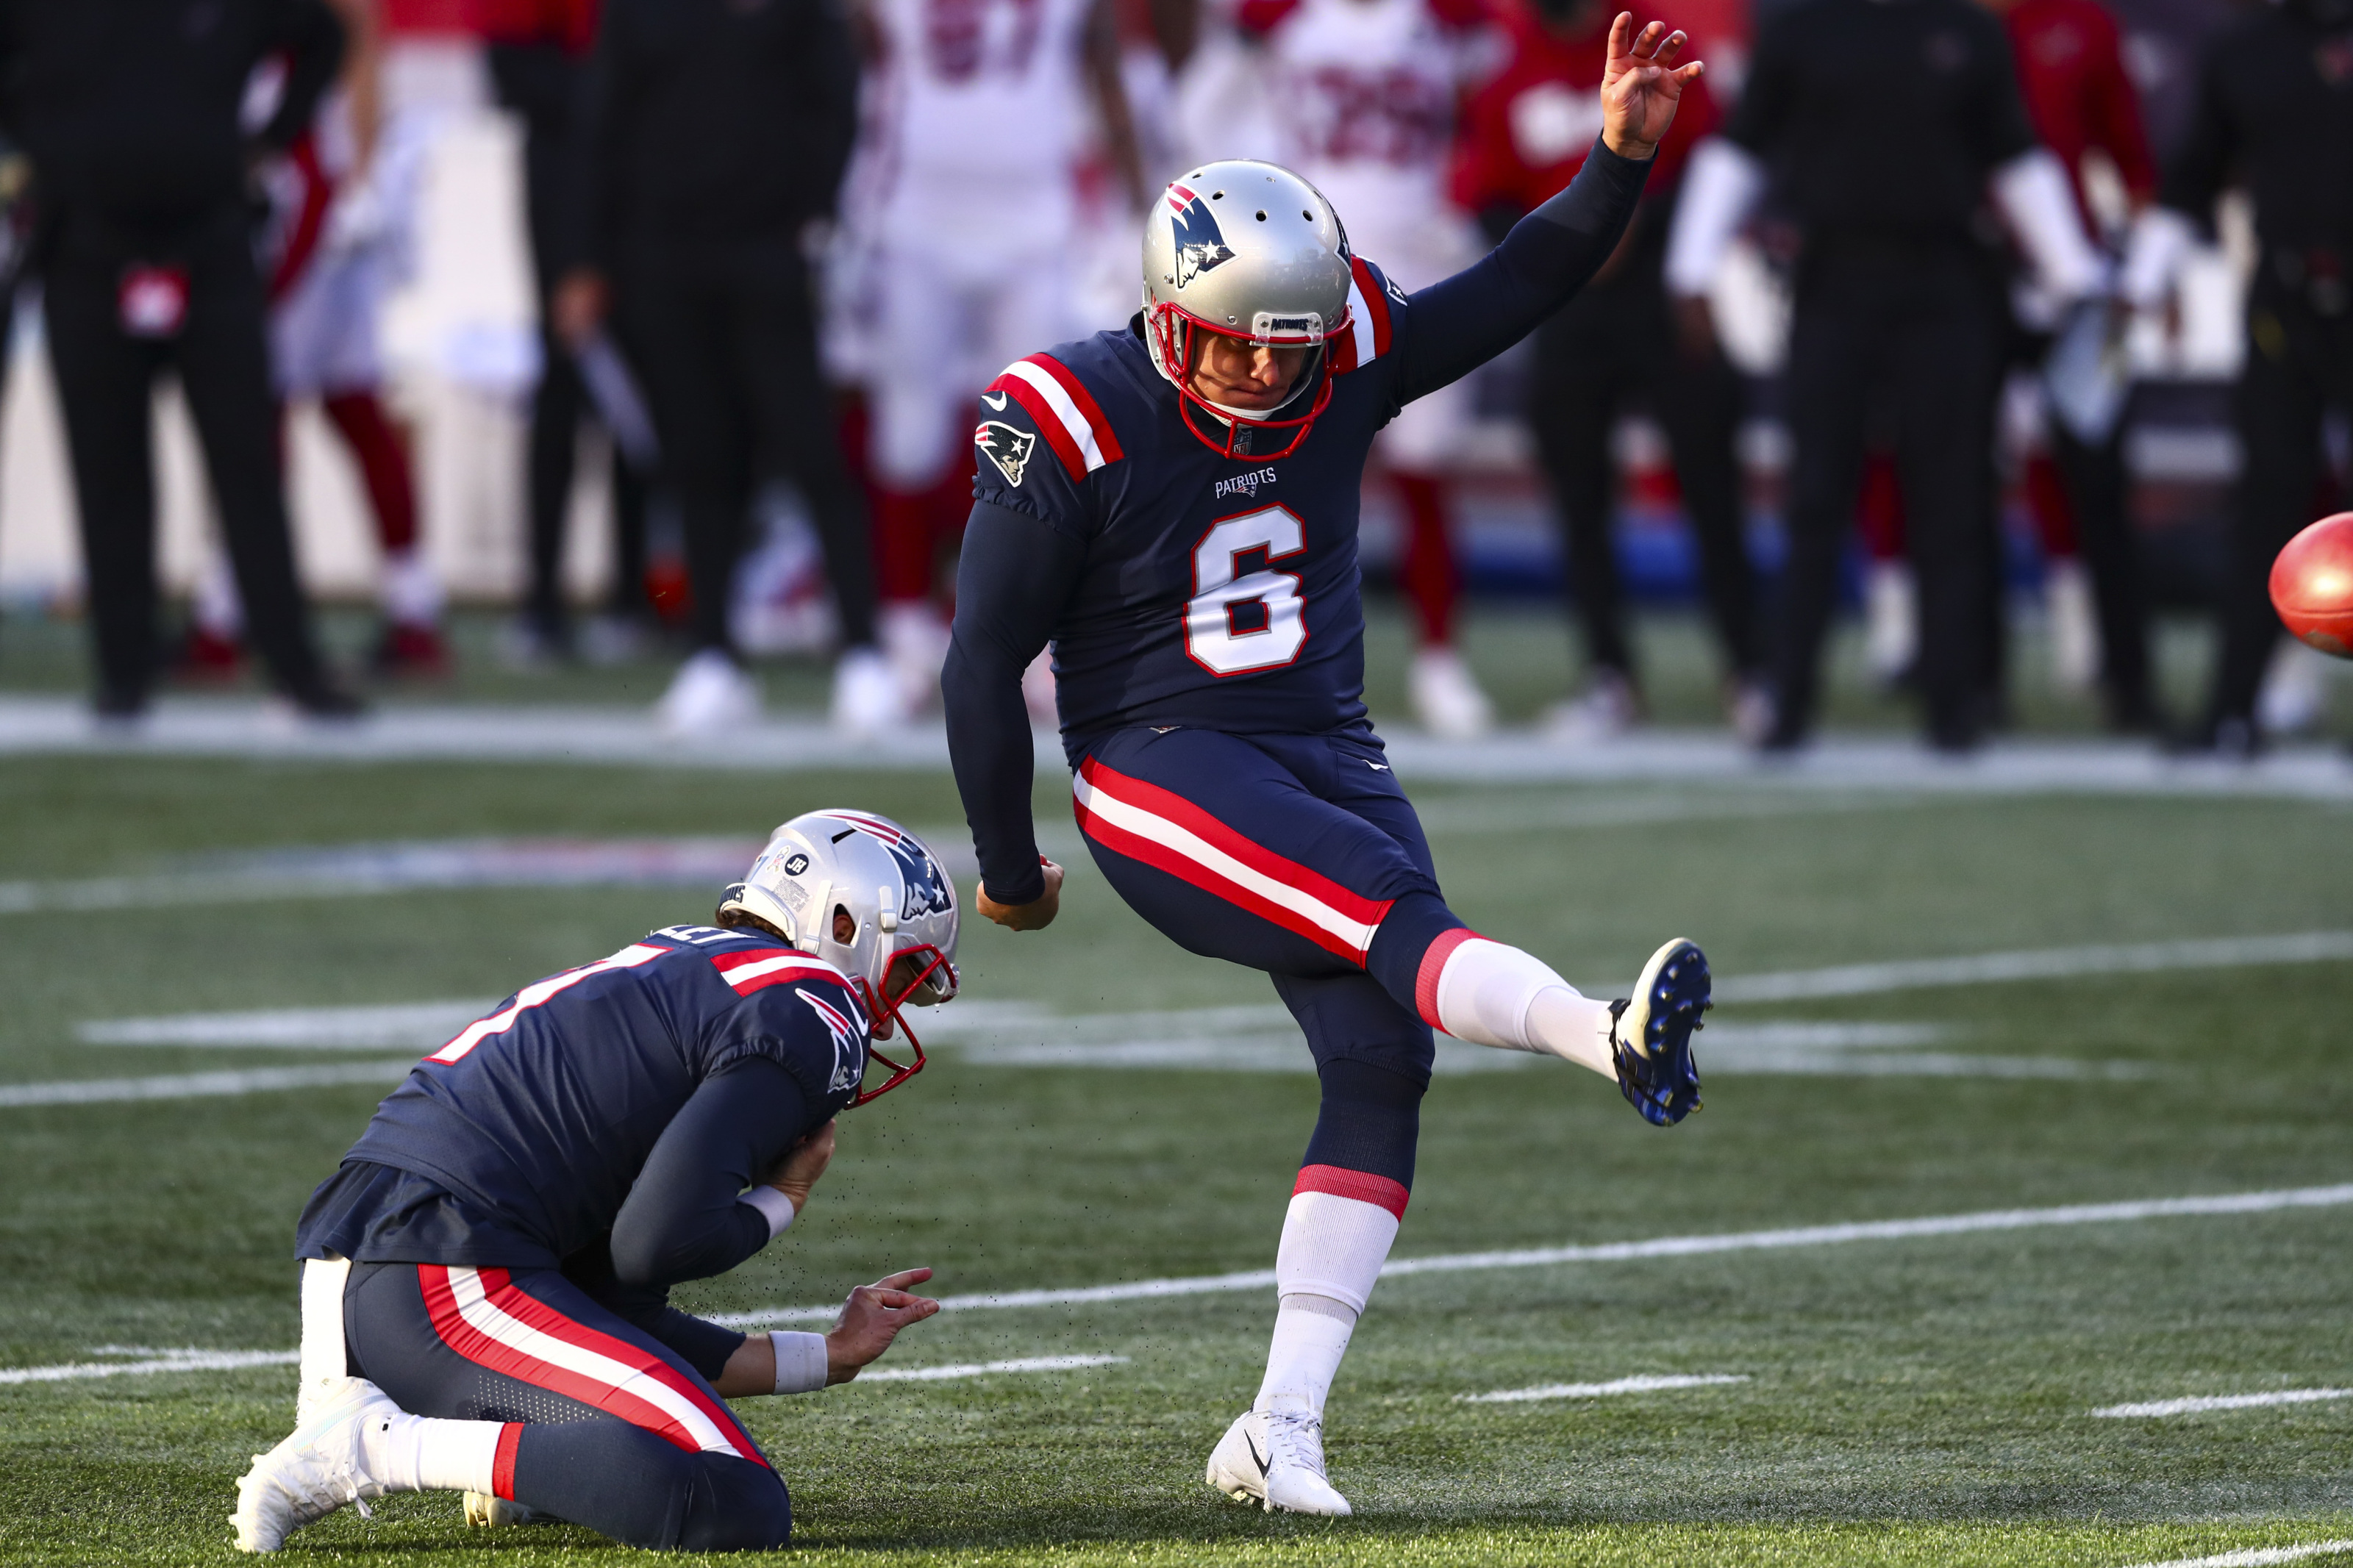 New England Patriots: Role reversal as Pats assume patsy role